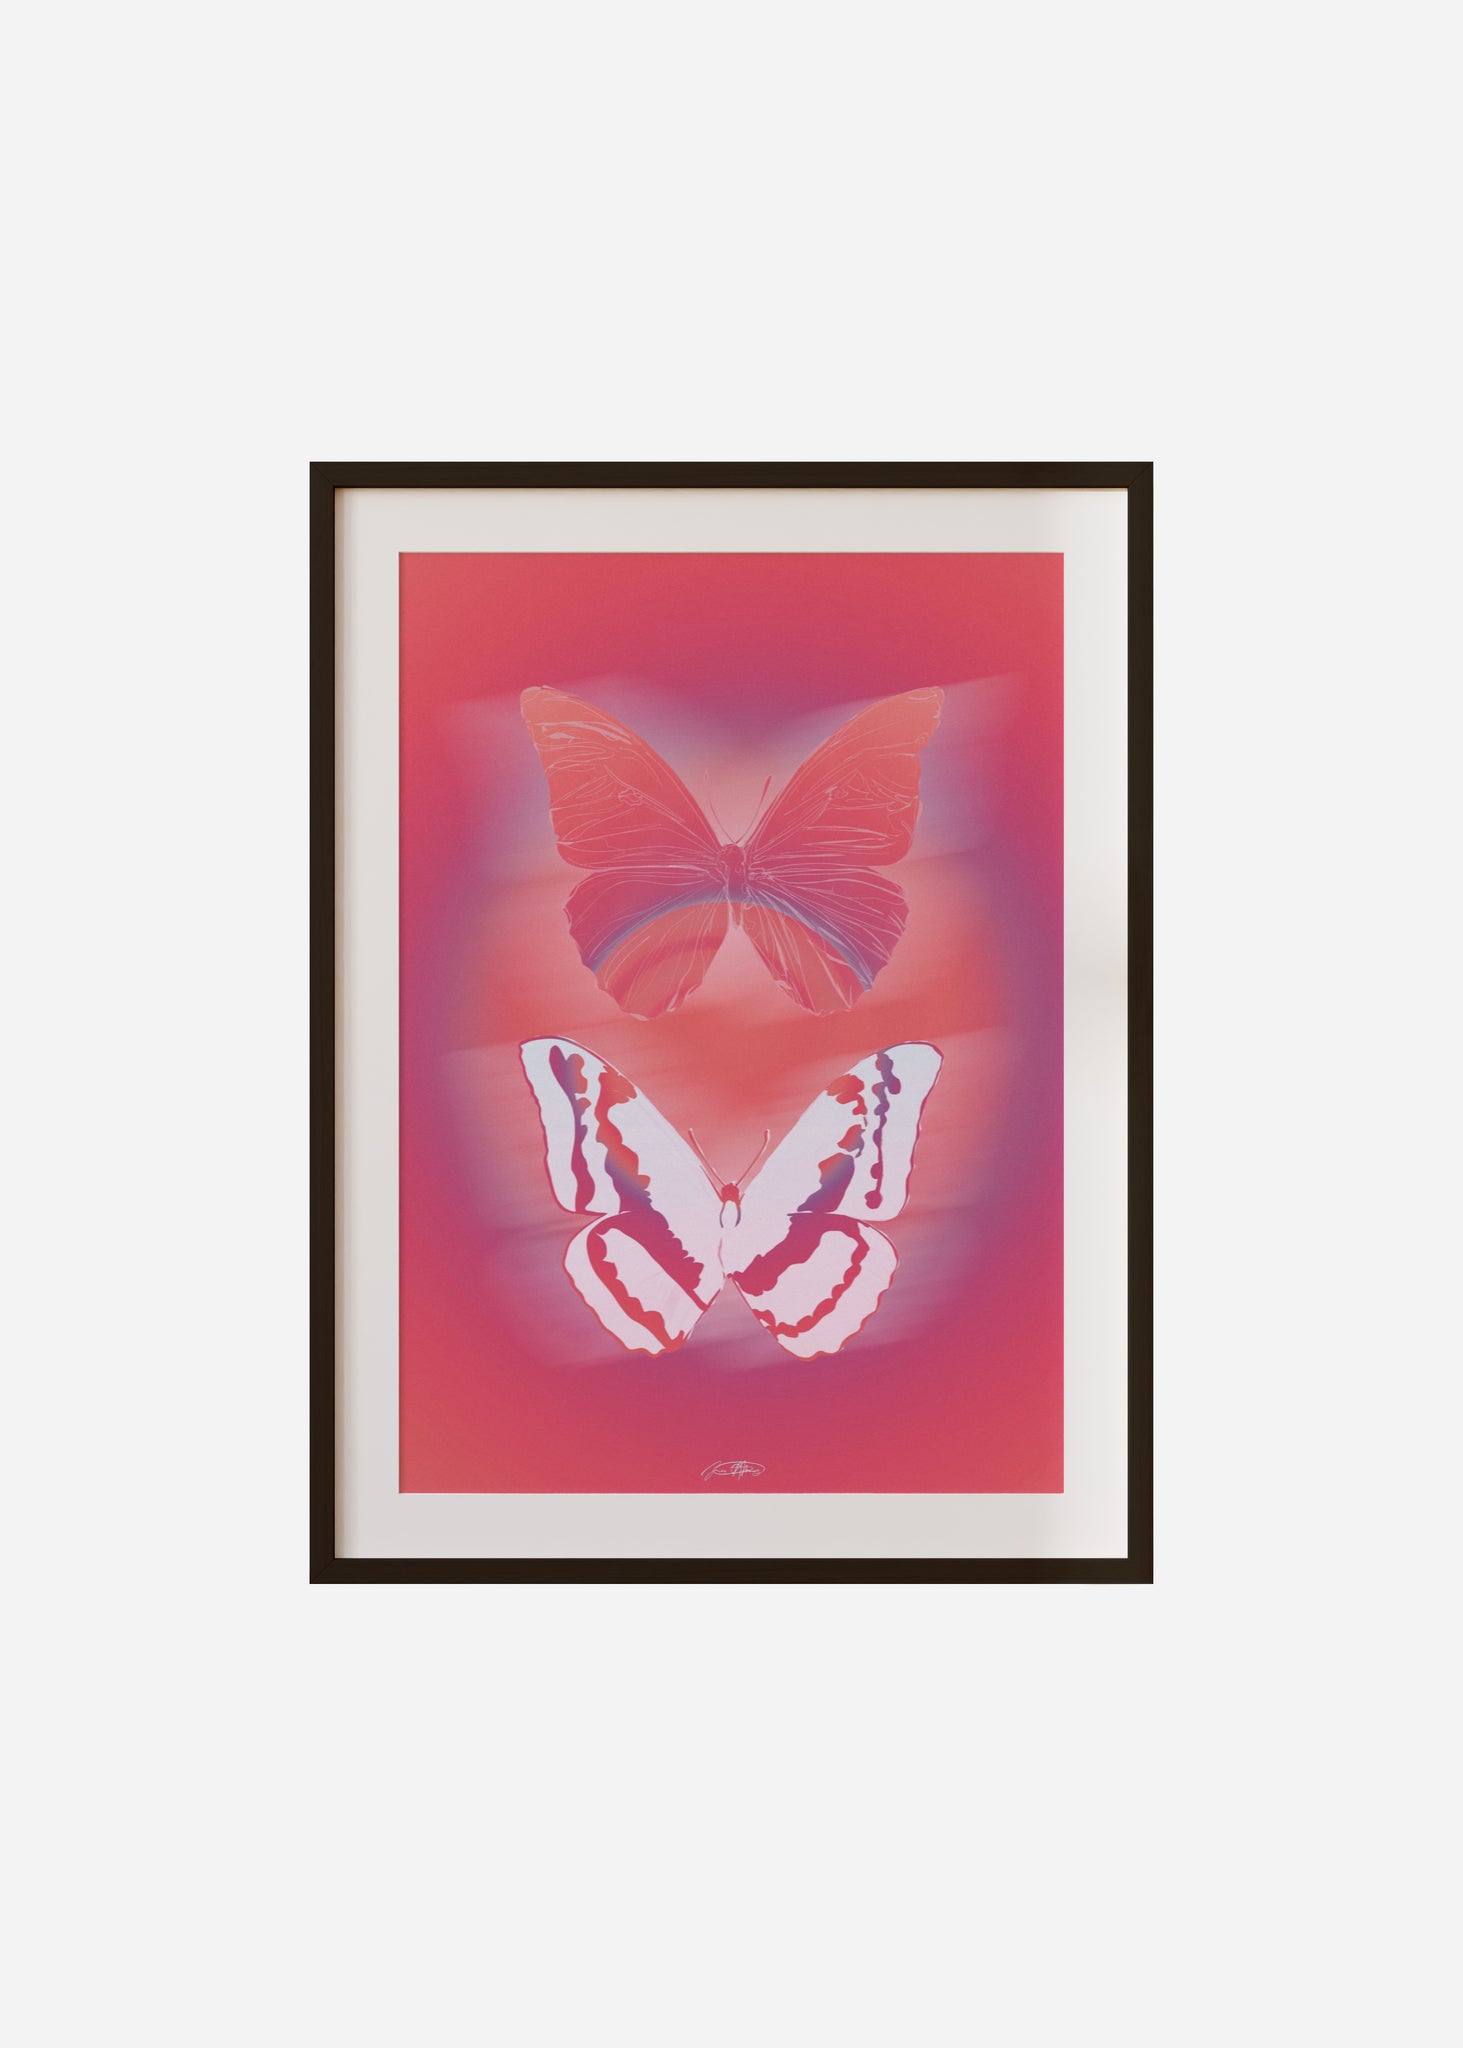 Life After Death / Twin Butterflies Framed & Mounted Print